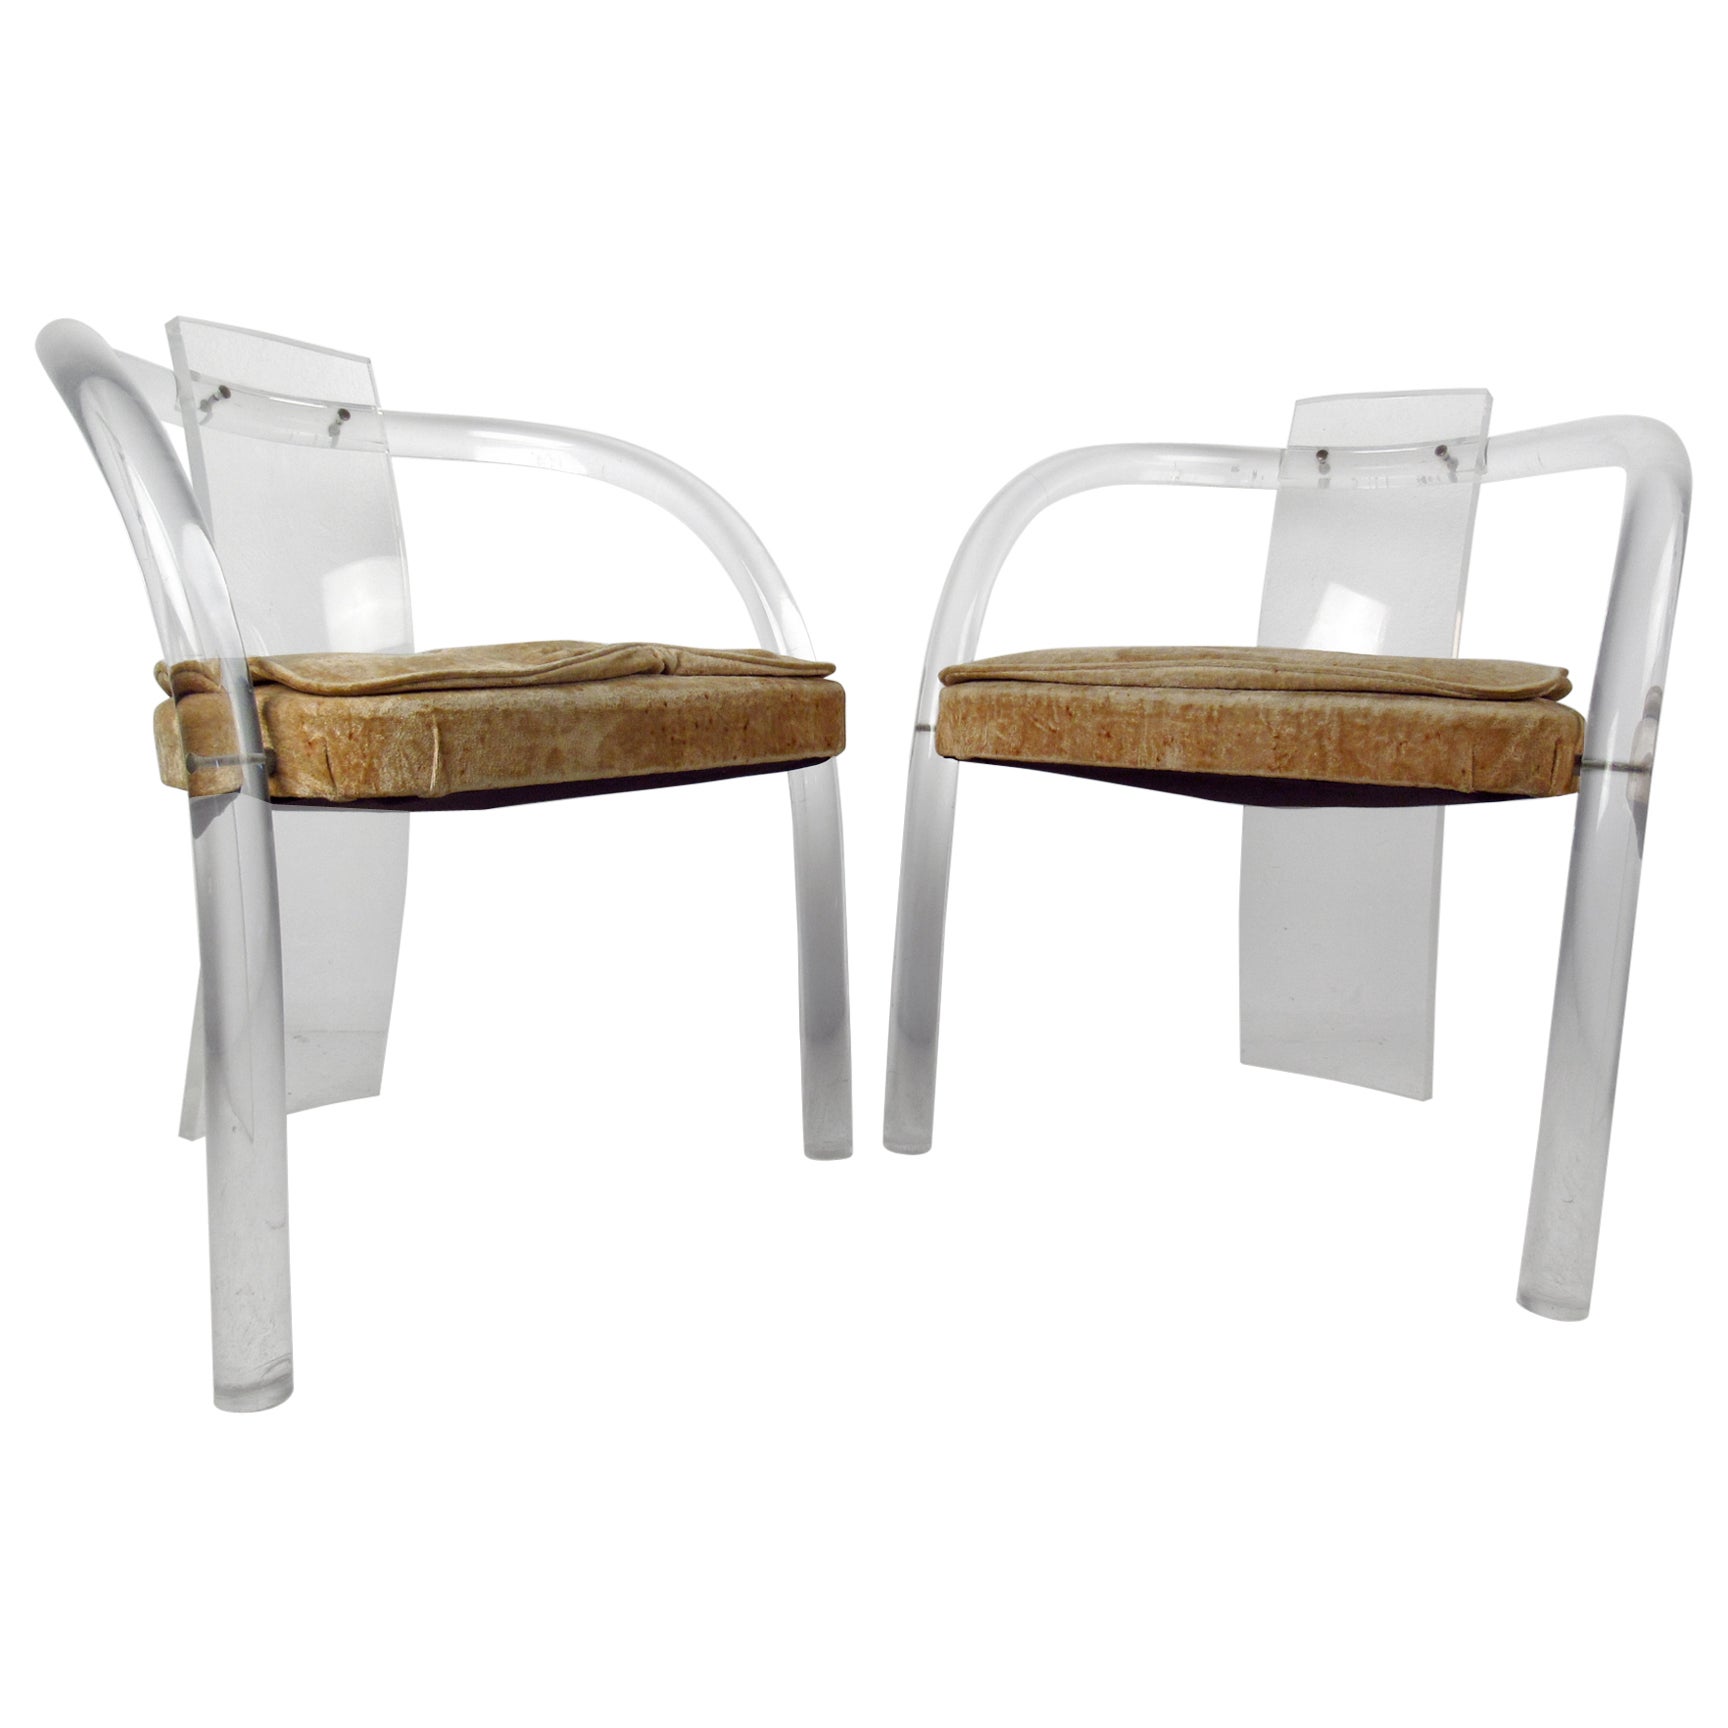 Pair of Mid-Century Modern Lucite Chairs with Upholstered Cushions For Sale